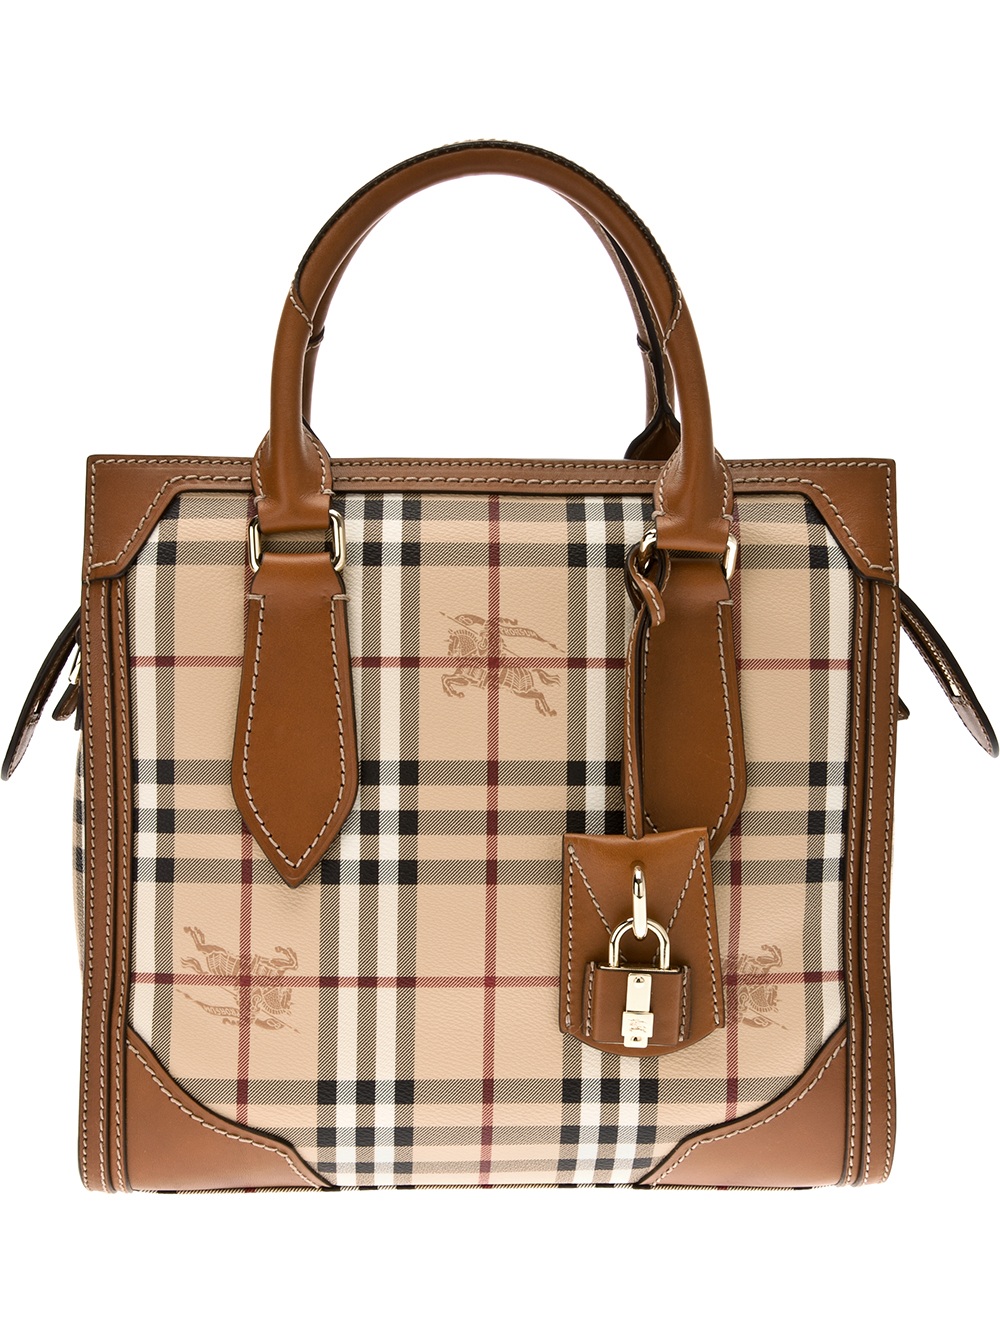 Burberry Honeywood Checked Tote in Brown - Lyst